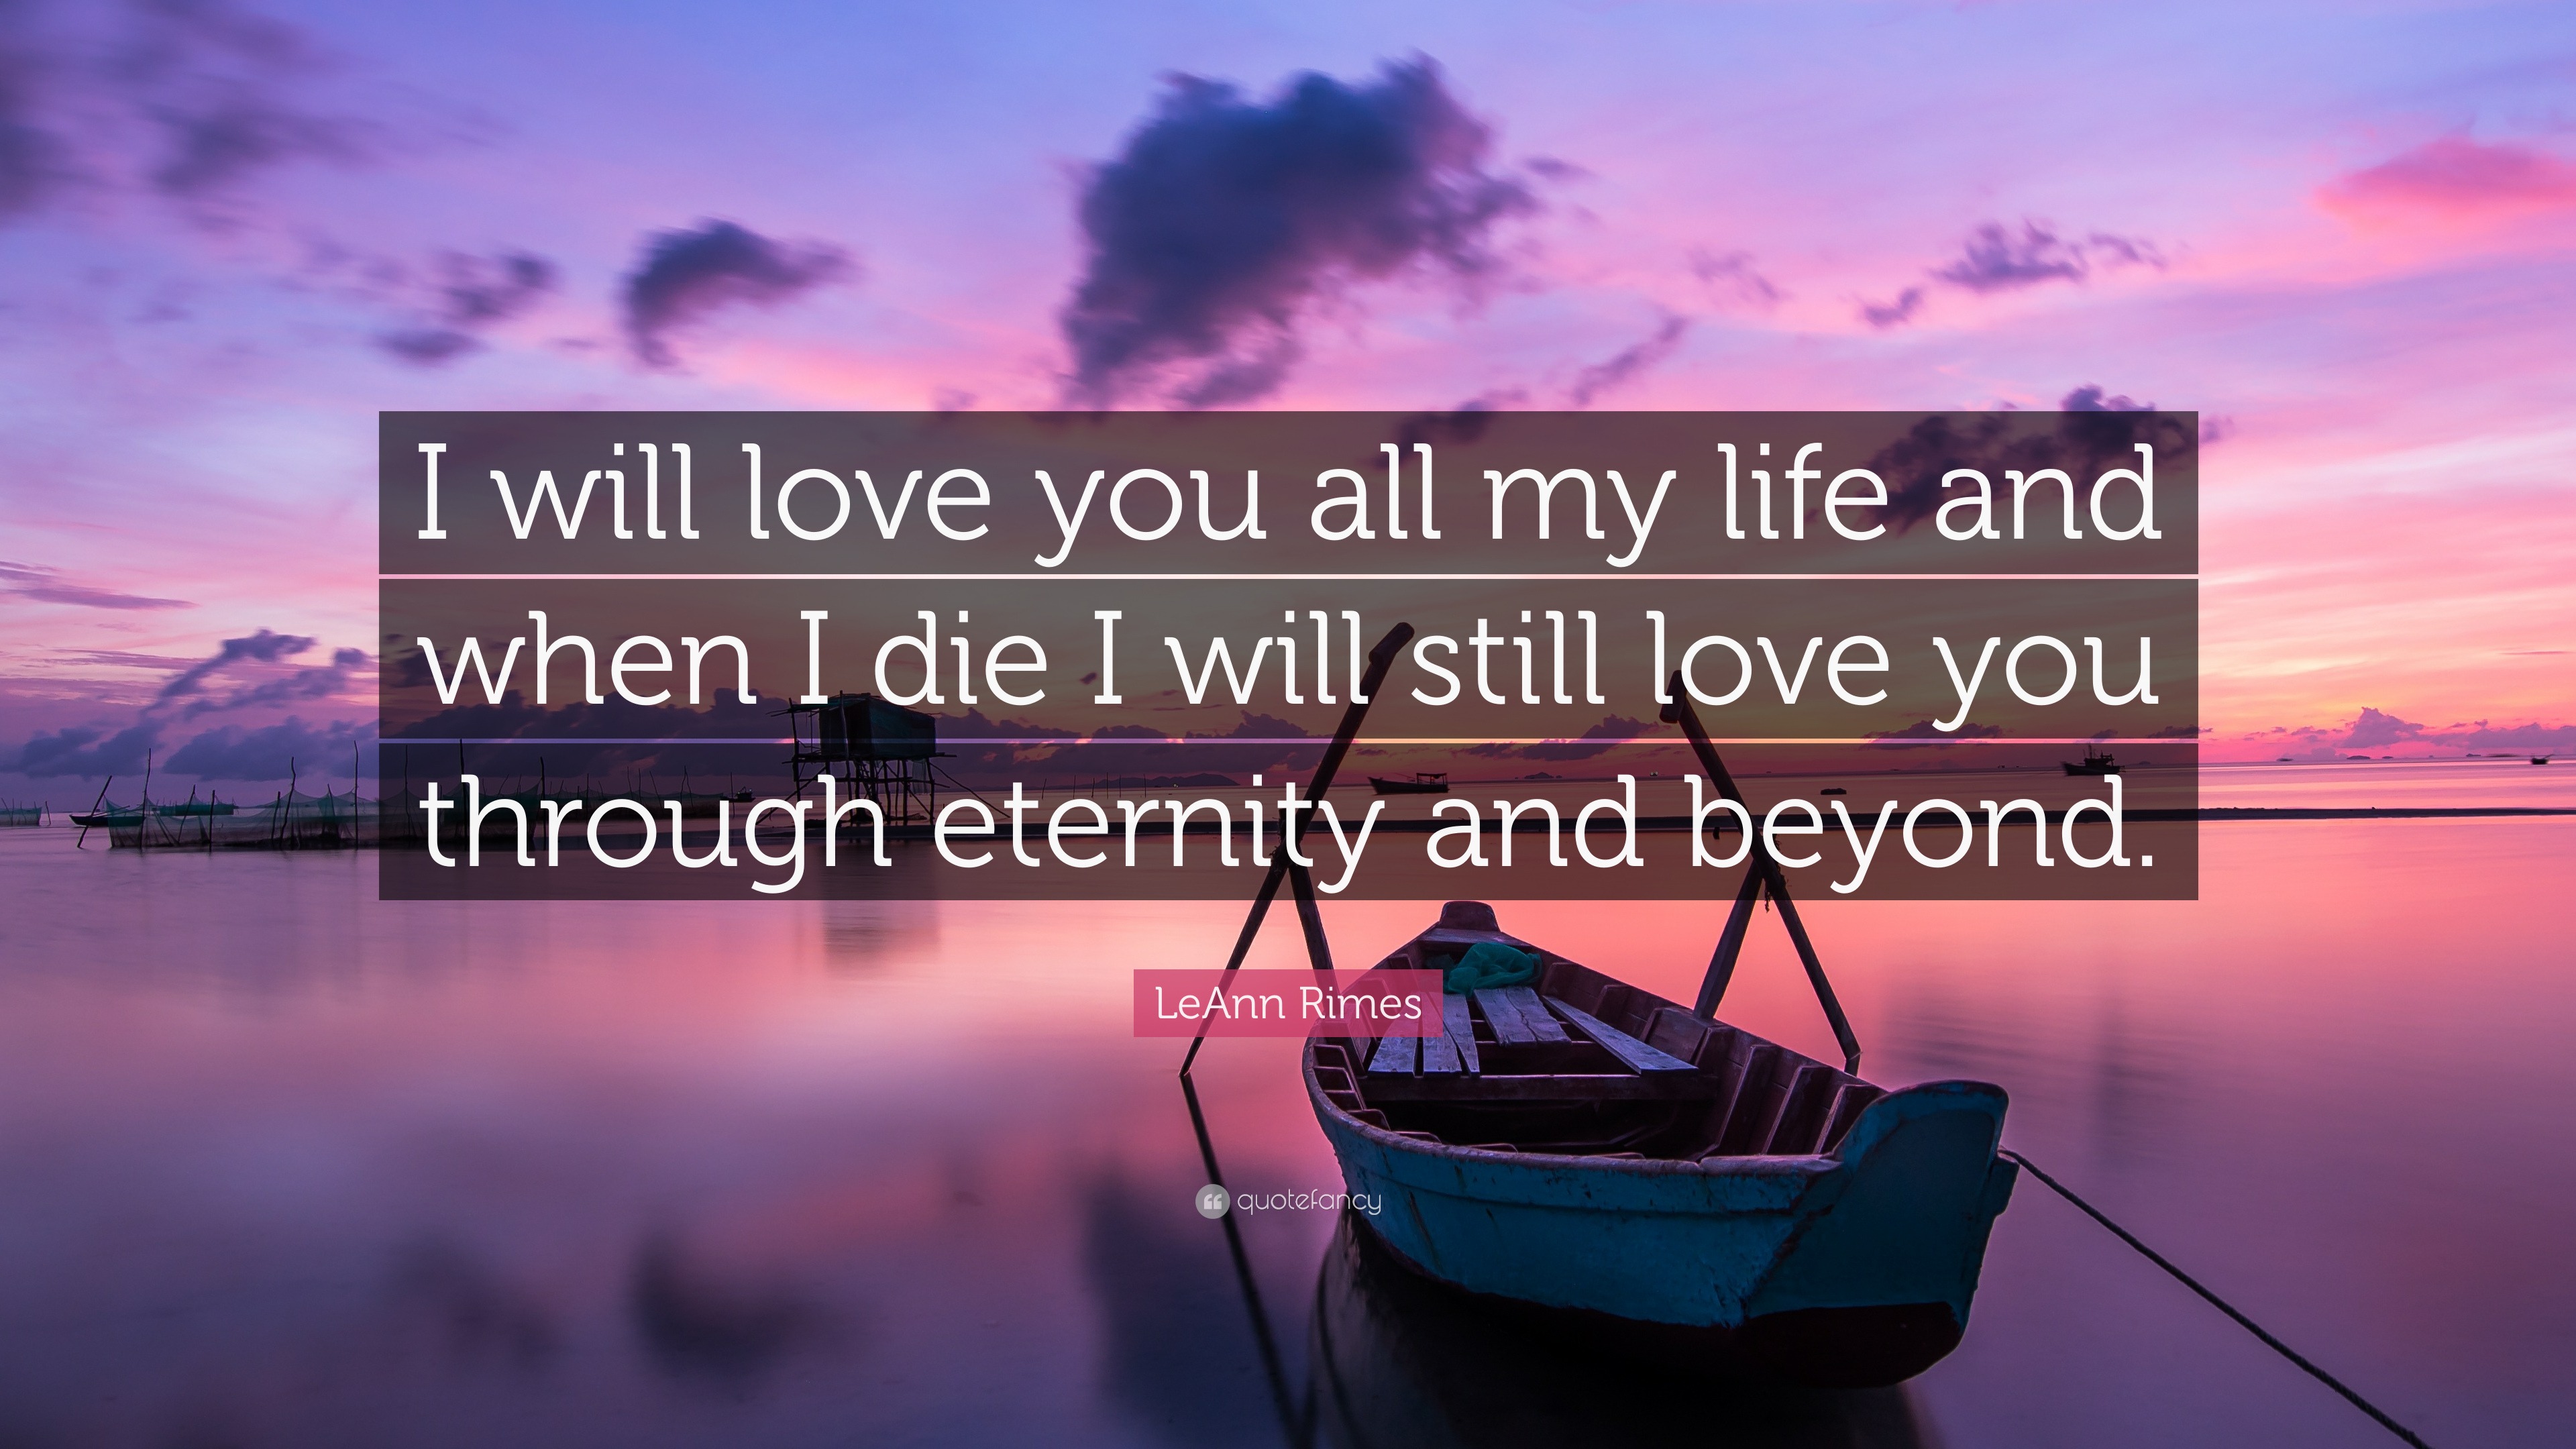 Leann Rimes Quote I Will Love You All My Life And When I Die I Will Still Love You Through Eternity And Beyond 7 Wallpapers Quotefancy